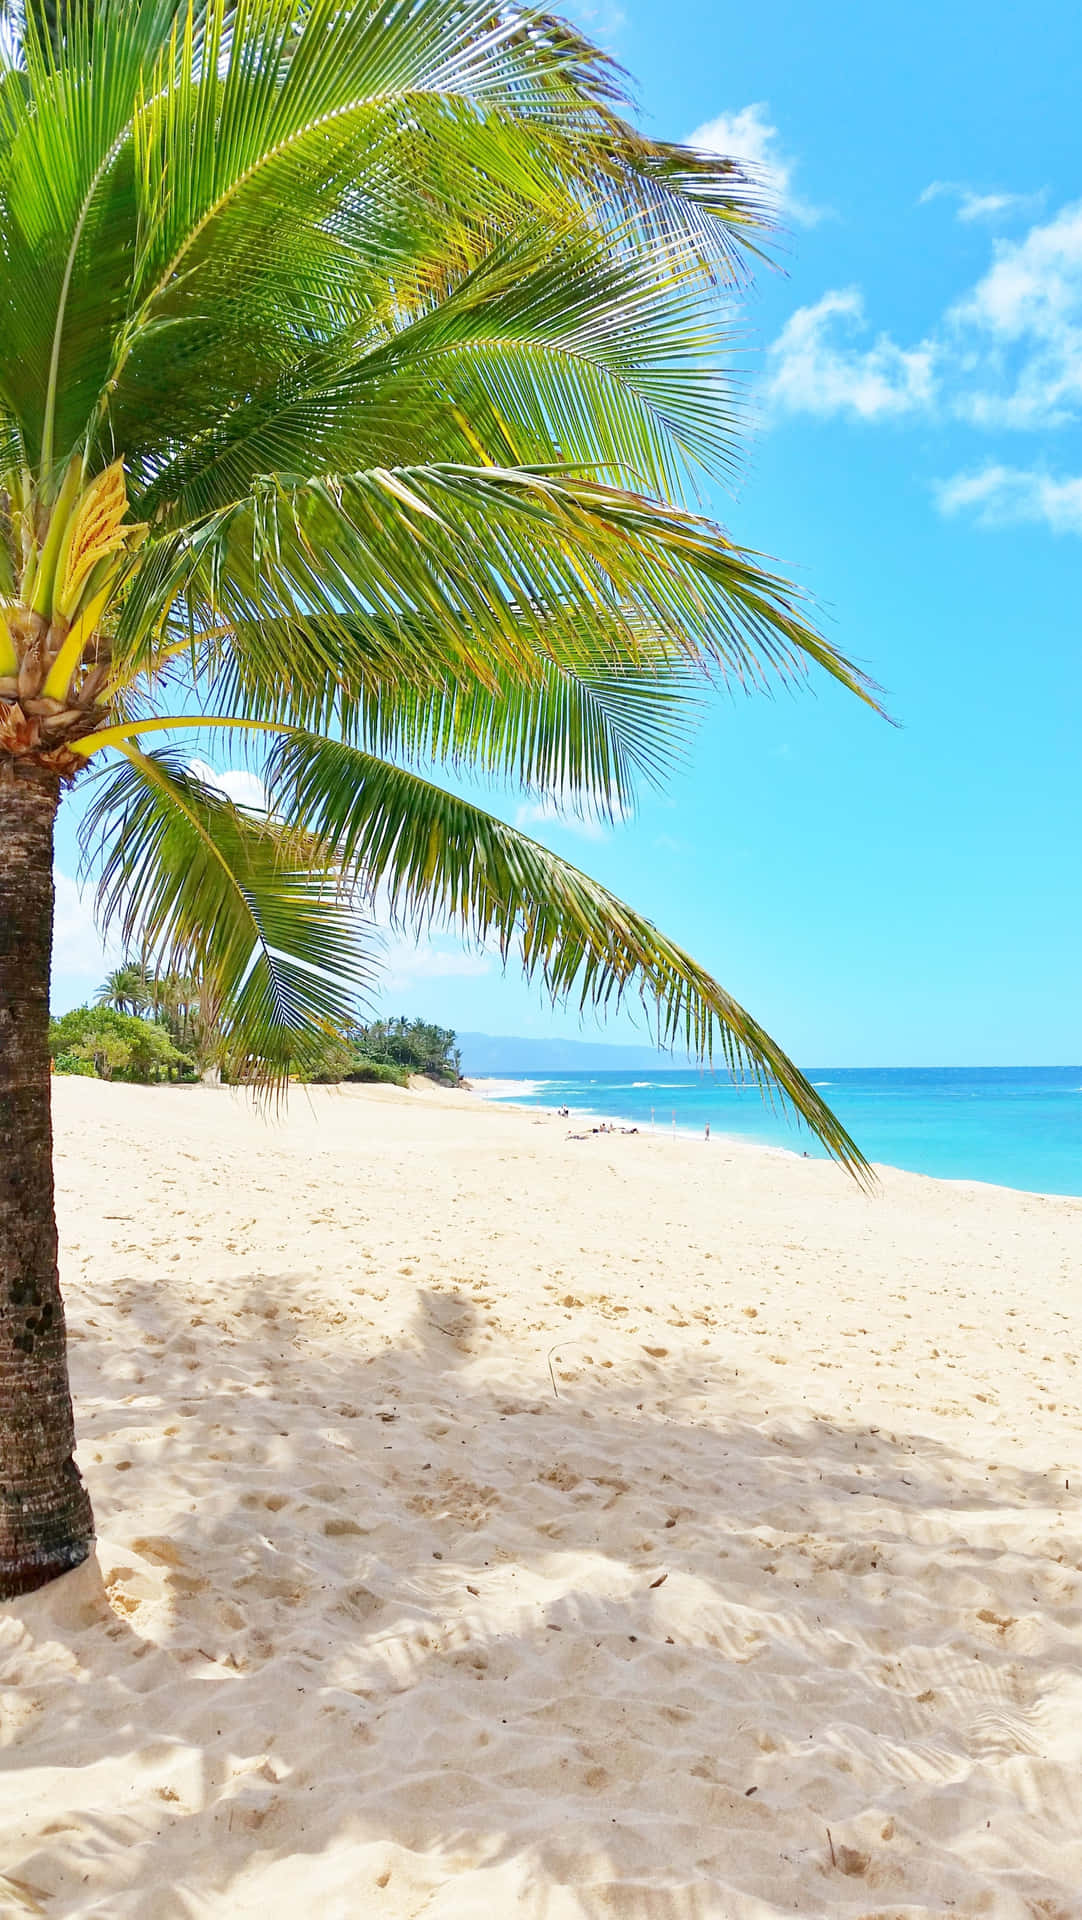 Enjoy a beautiful day at the beach with Palm Trees